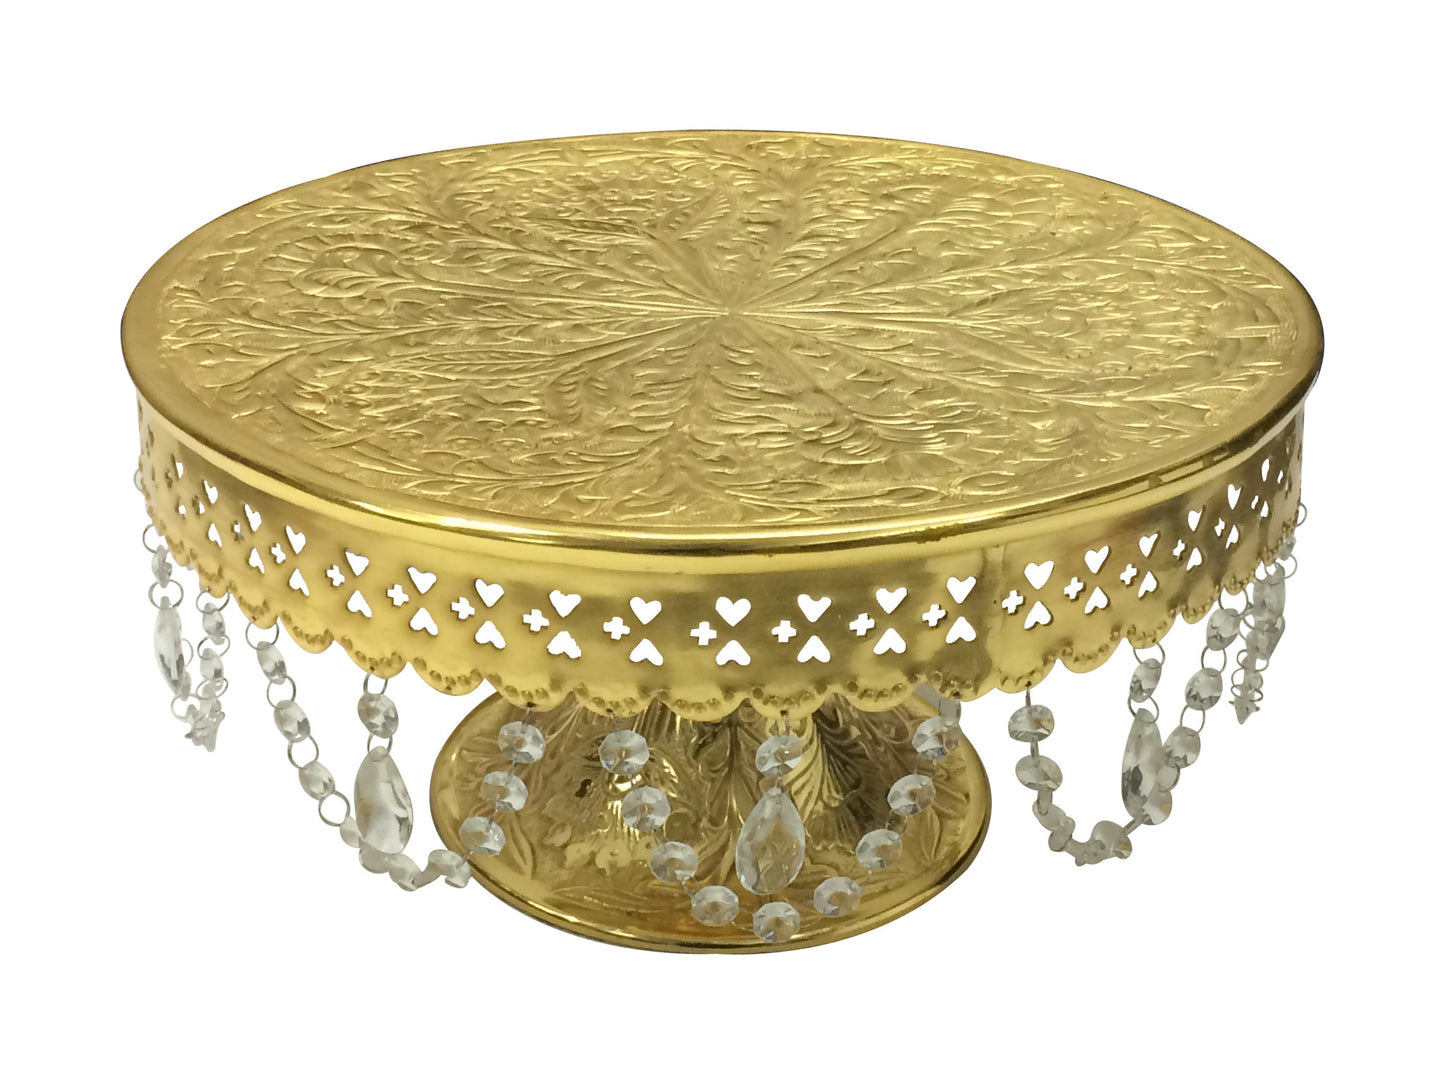 GiftBay Creations® Pedestal Cake Stand Gold, 14" with Clear Crystals